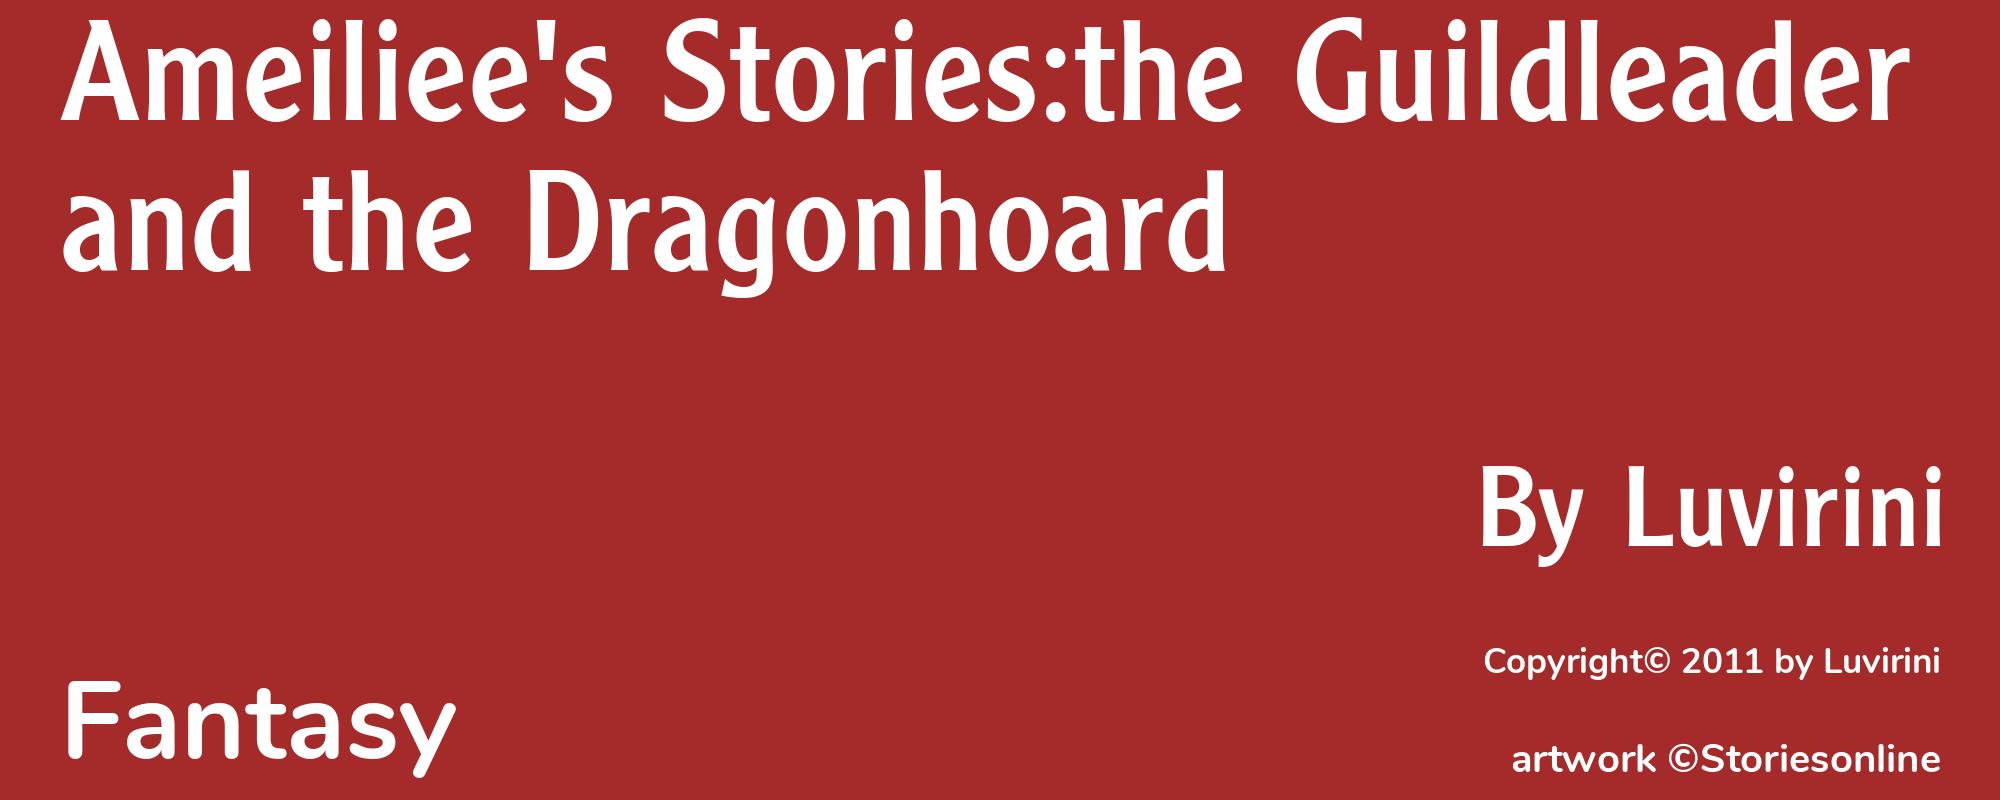 Ameiliee's Stories:the Guildleader and the Dragonhoard - Cover